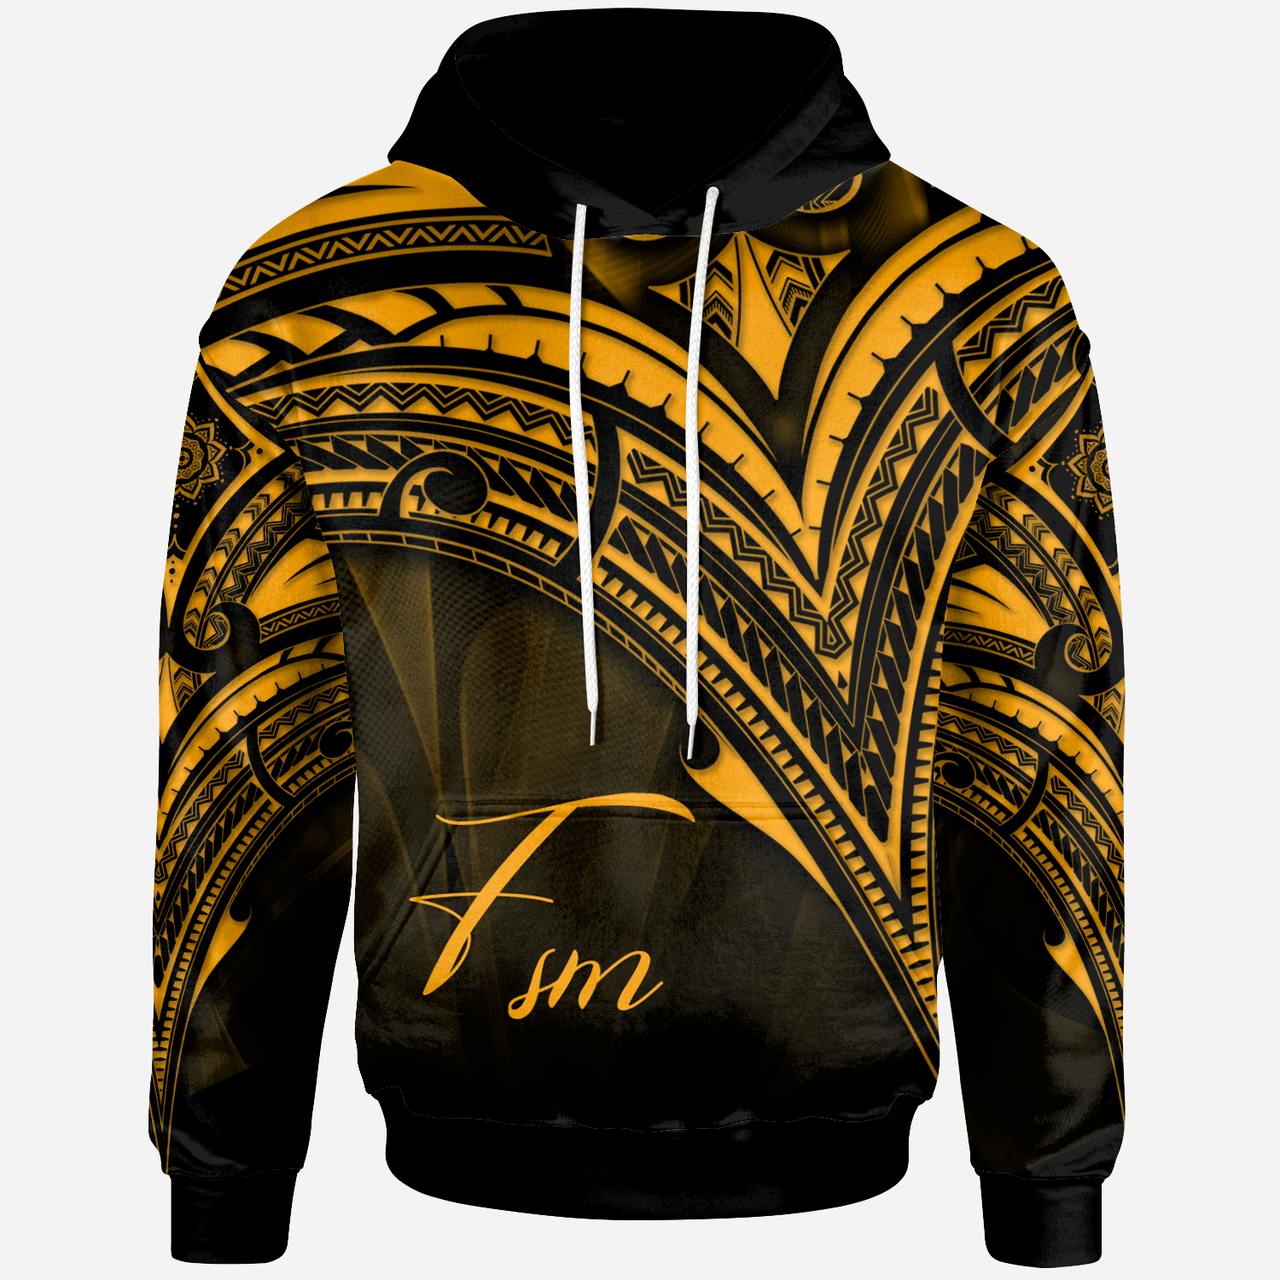 Federated States of Micronesia Hoodie - Gold Color Cross Style